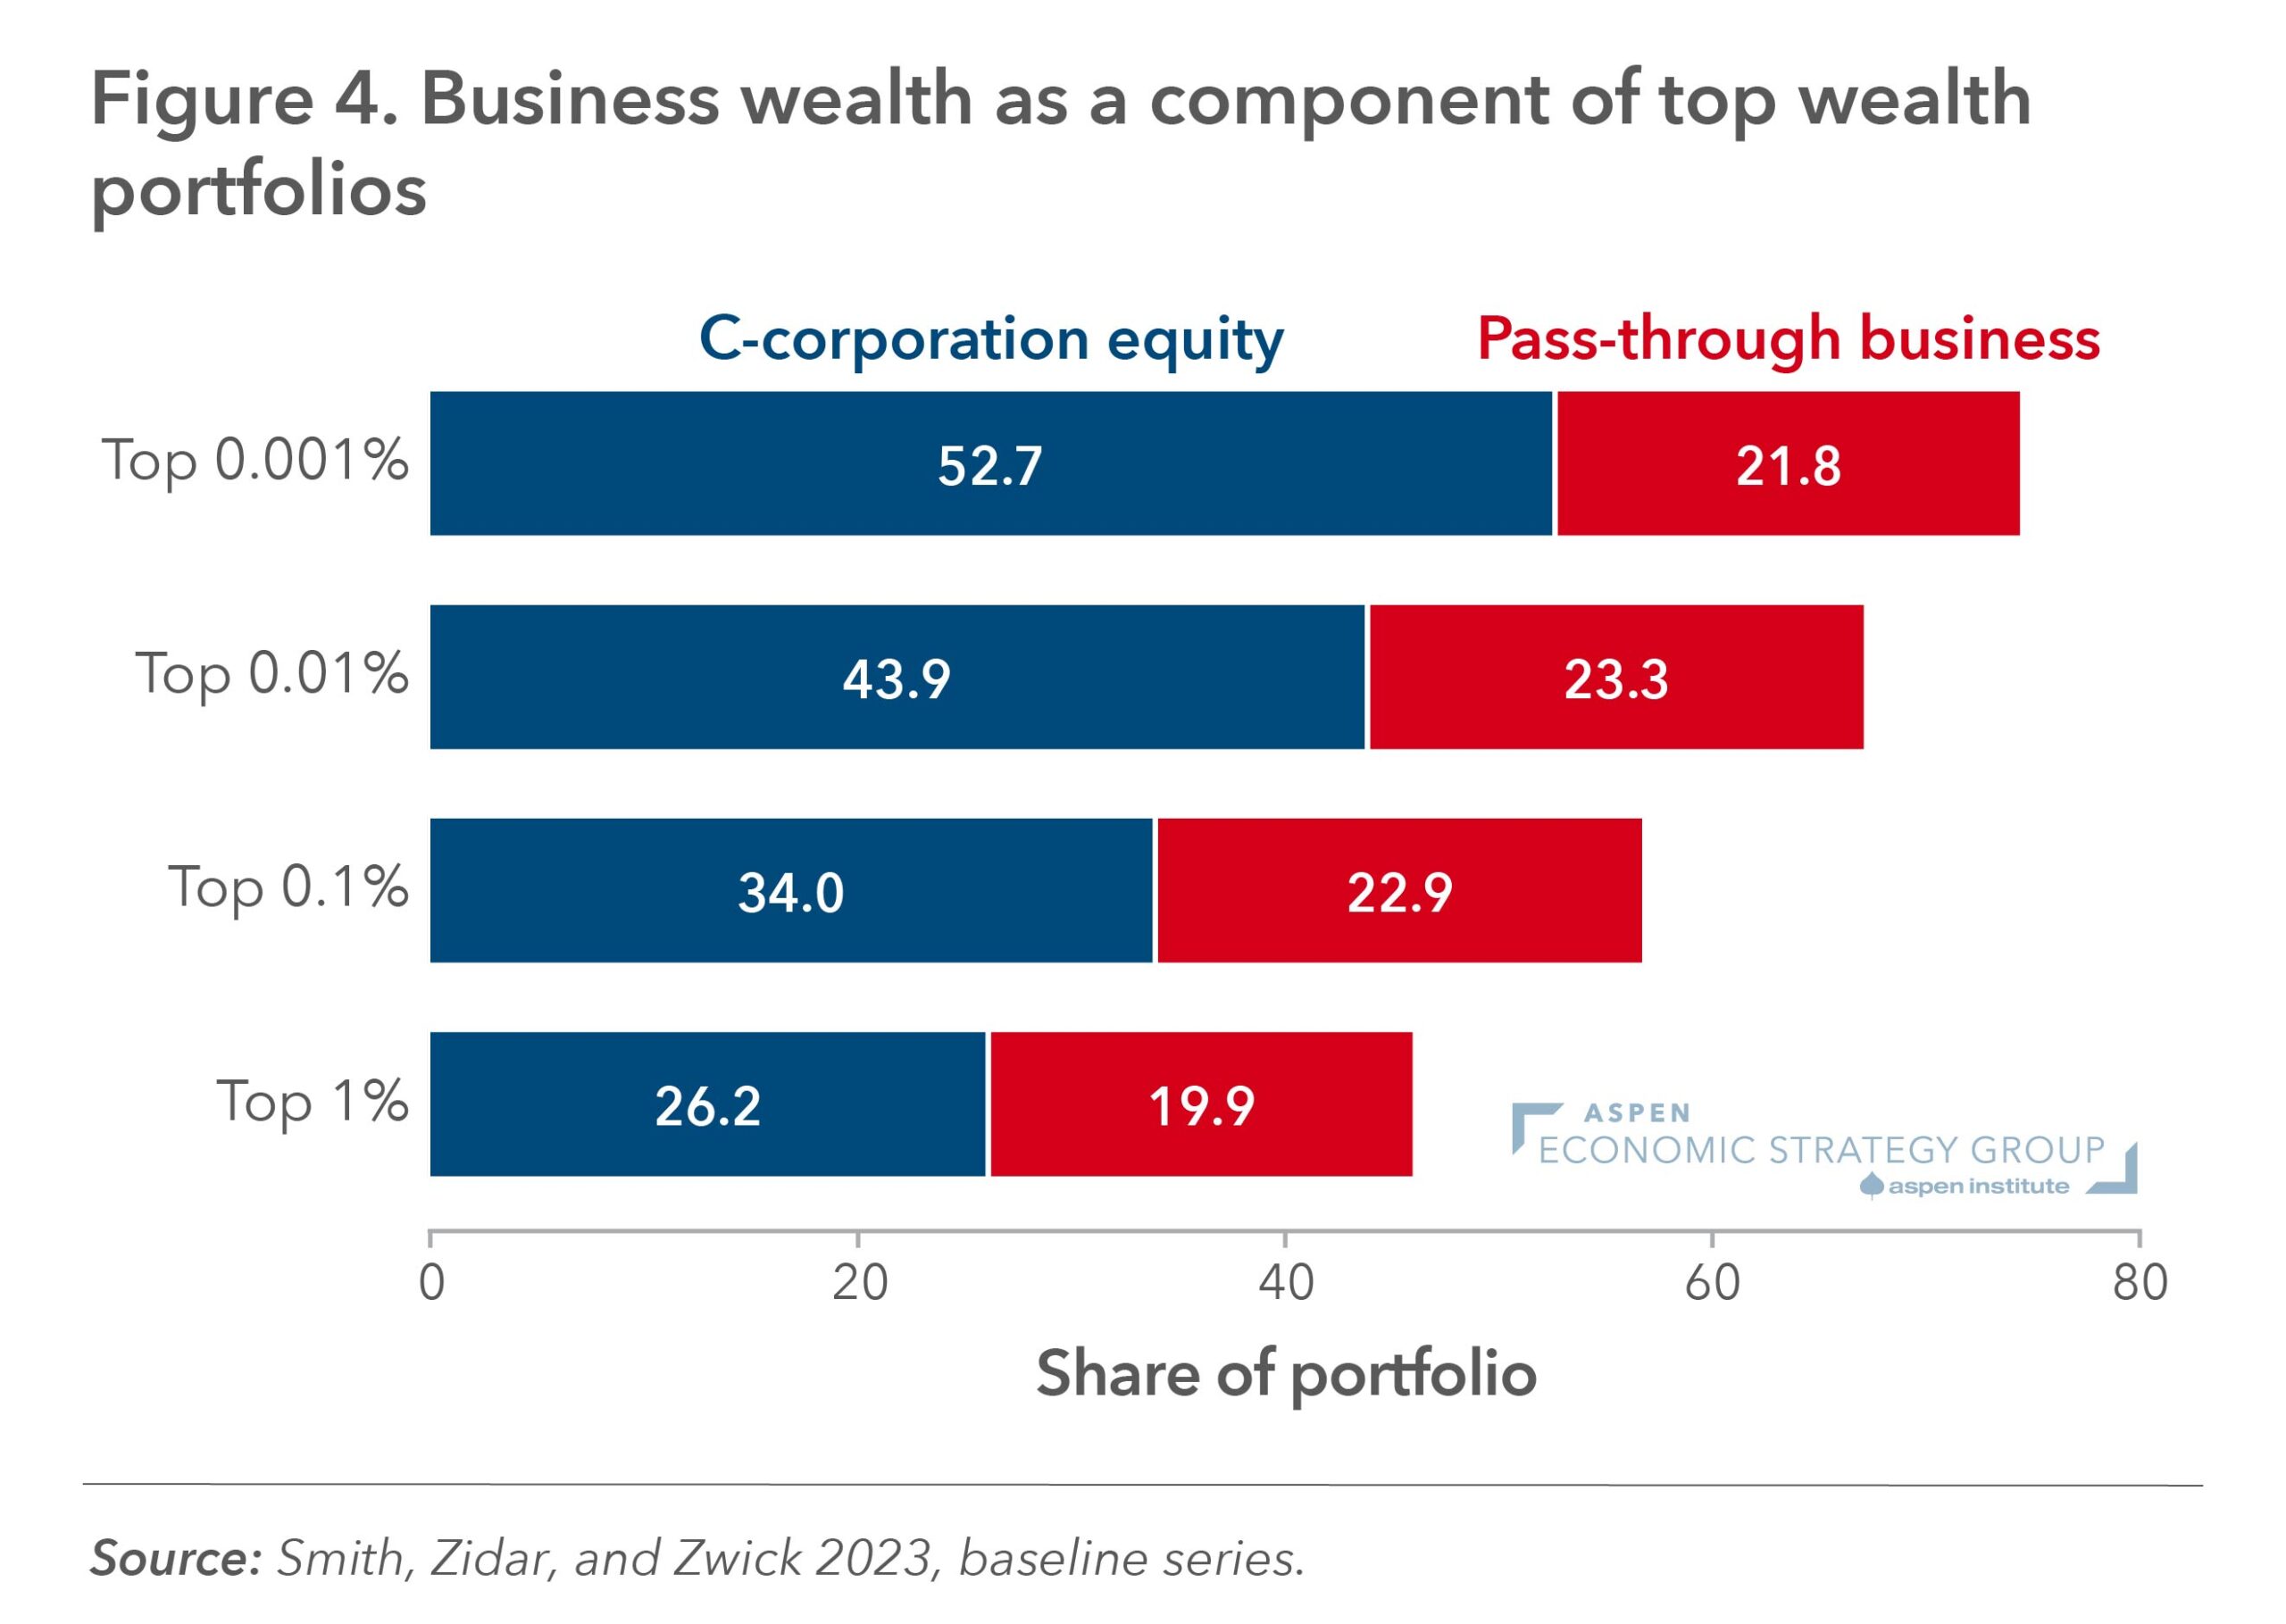 Figure 4: Business Wealth as a Component of Top Wealth Portfolios